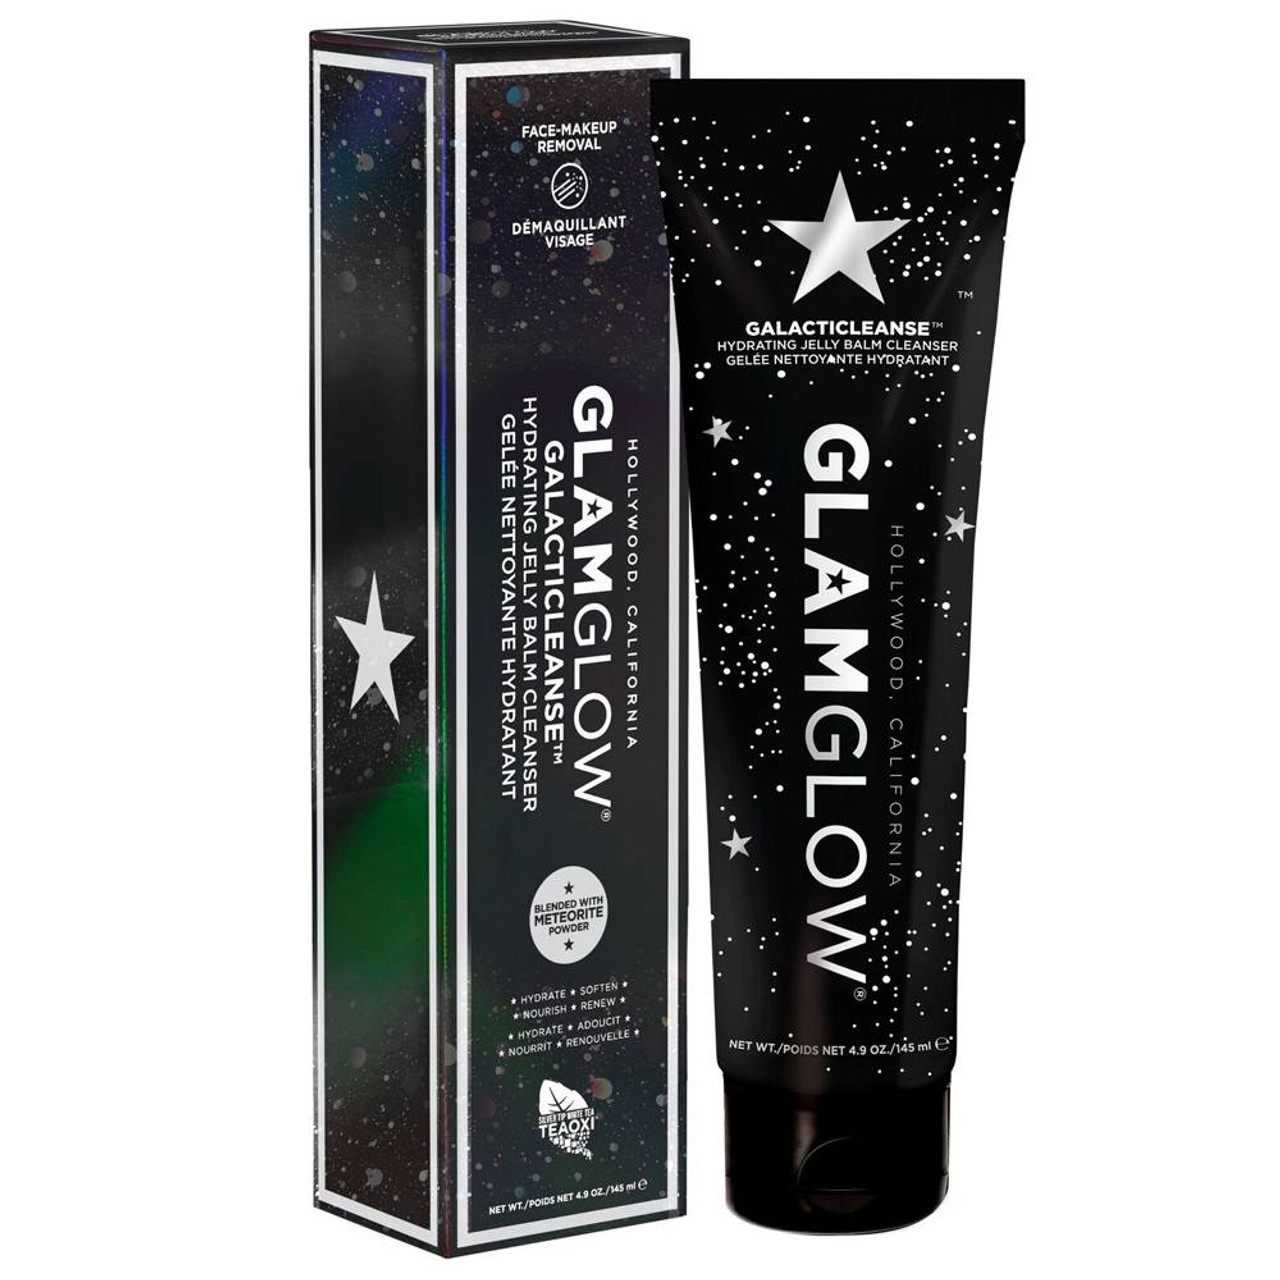 GlamGlow GalactiCleanse Hydrating Jelly Balm Cleanser